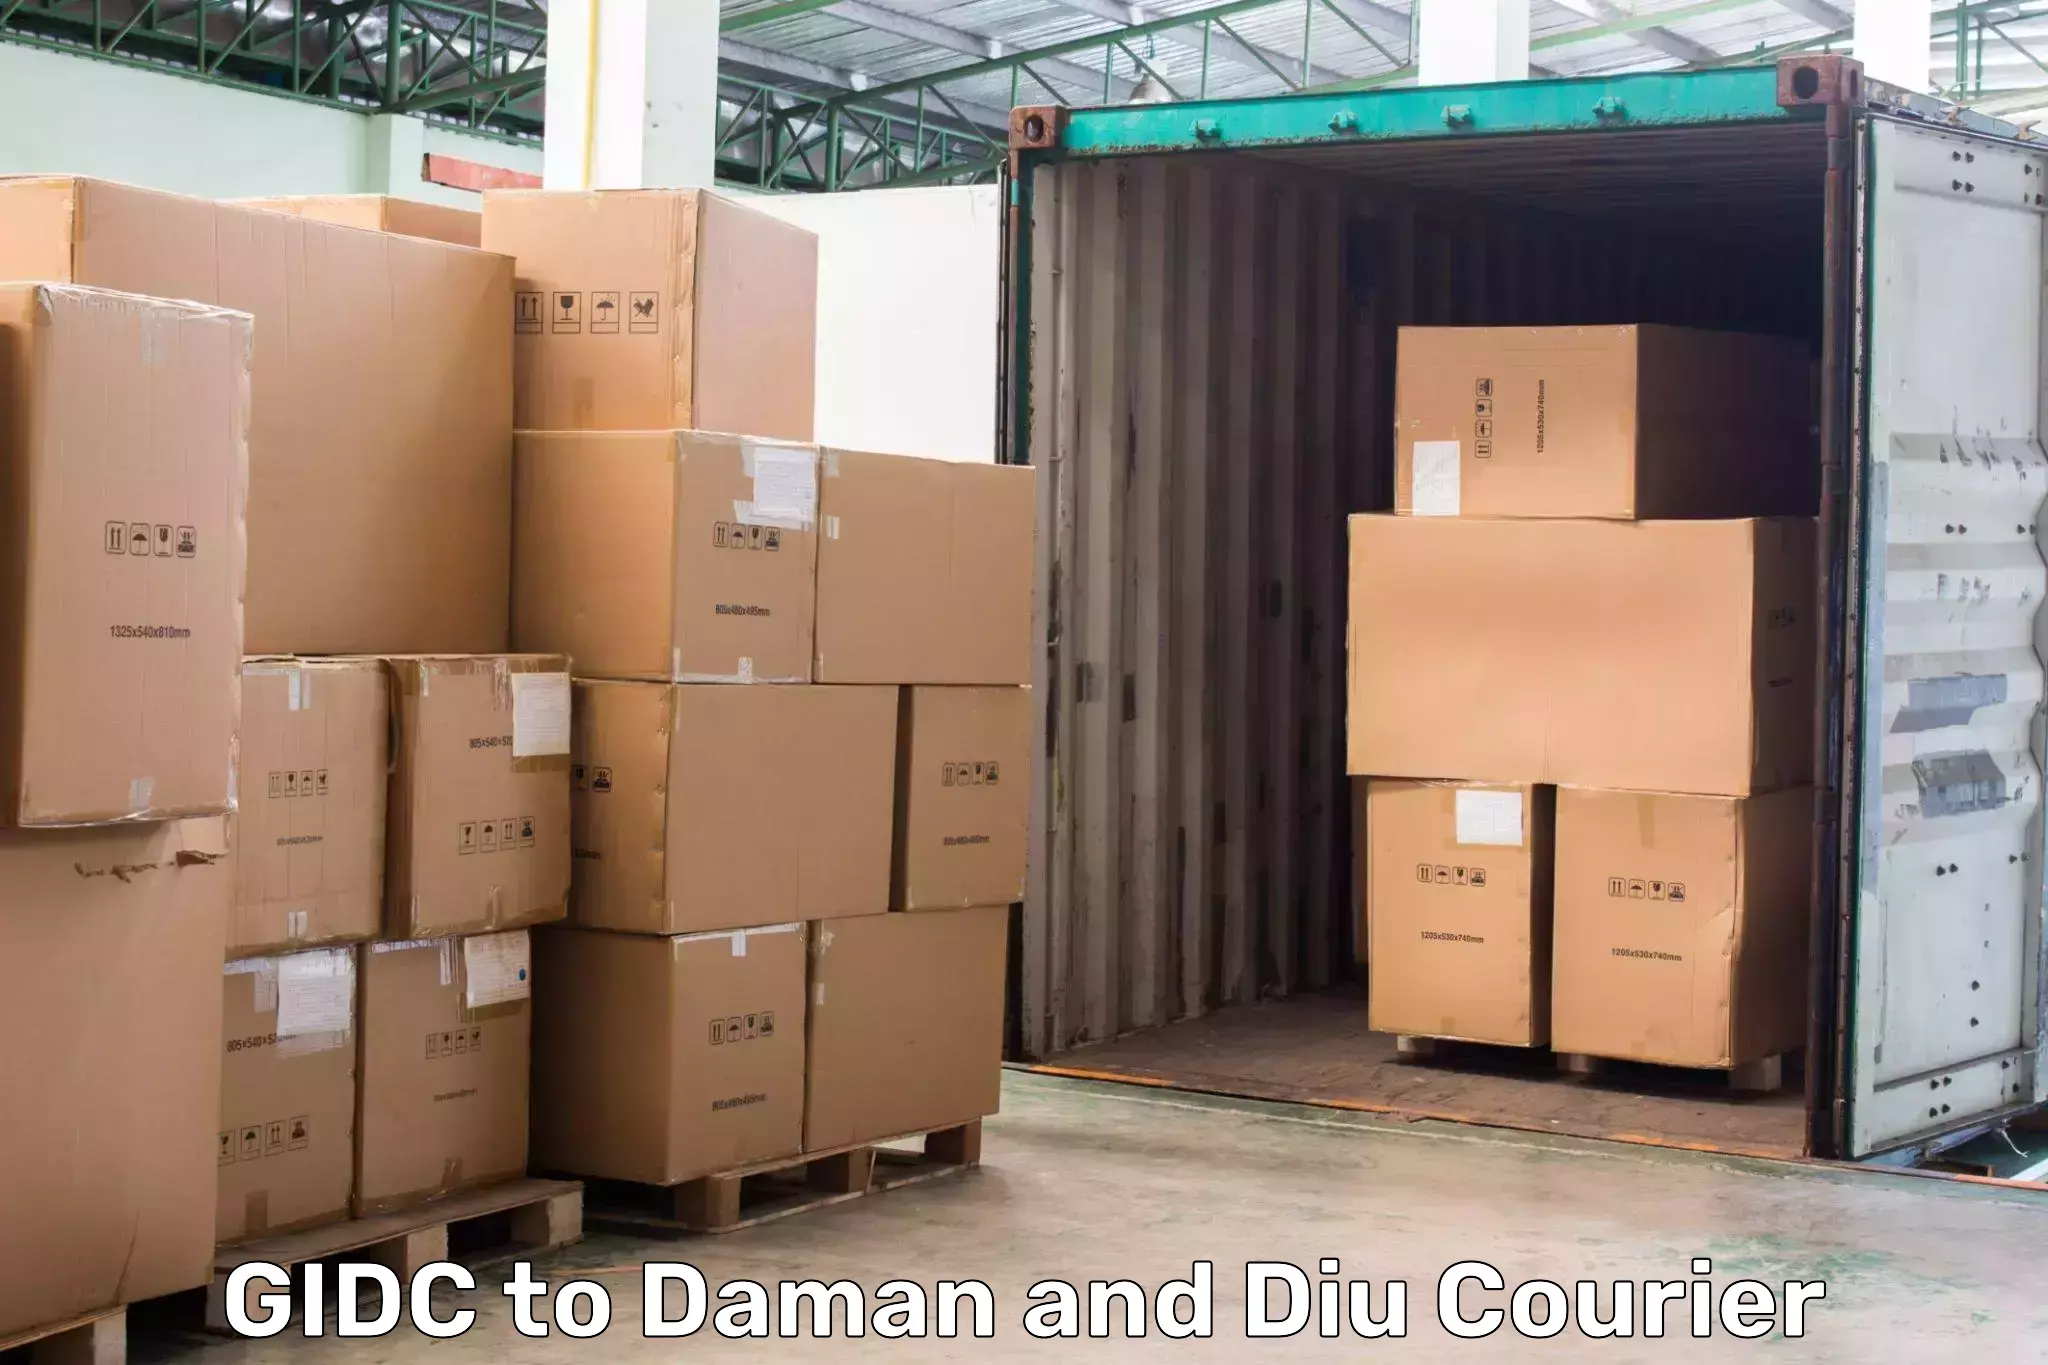 Global shipping networks in GIDC to Daman and Diu